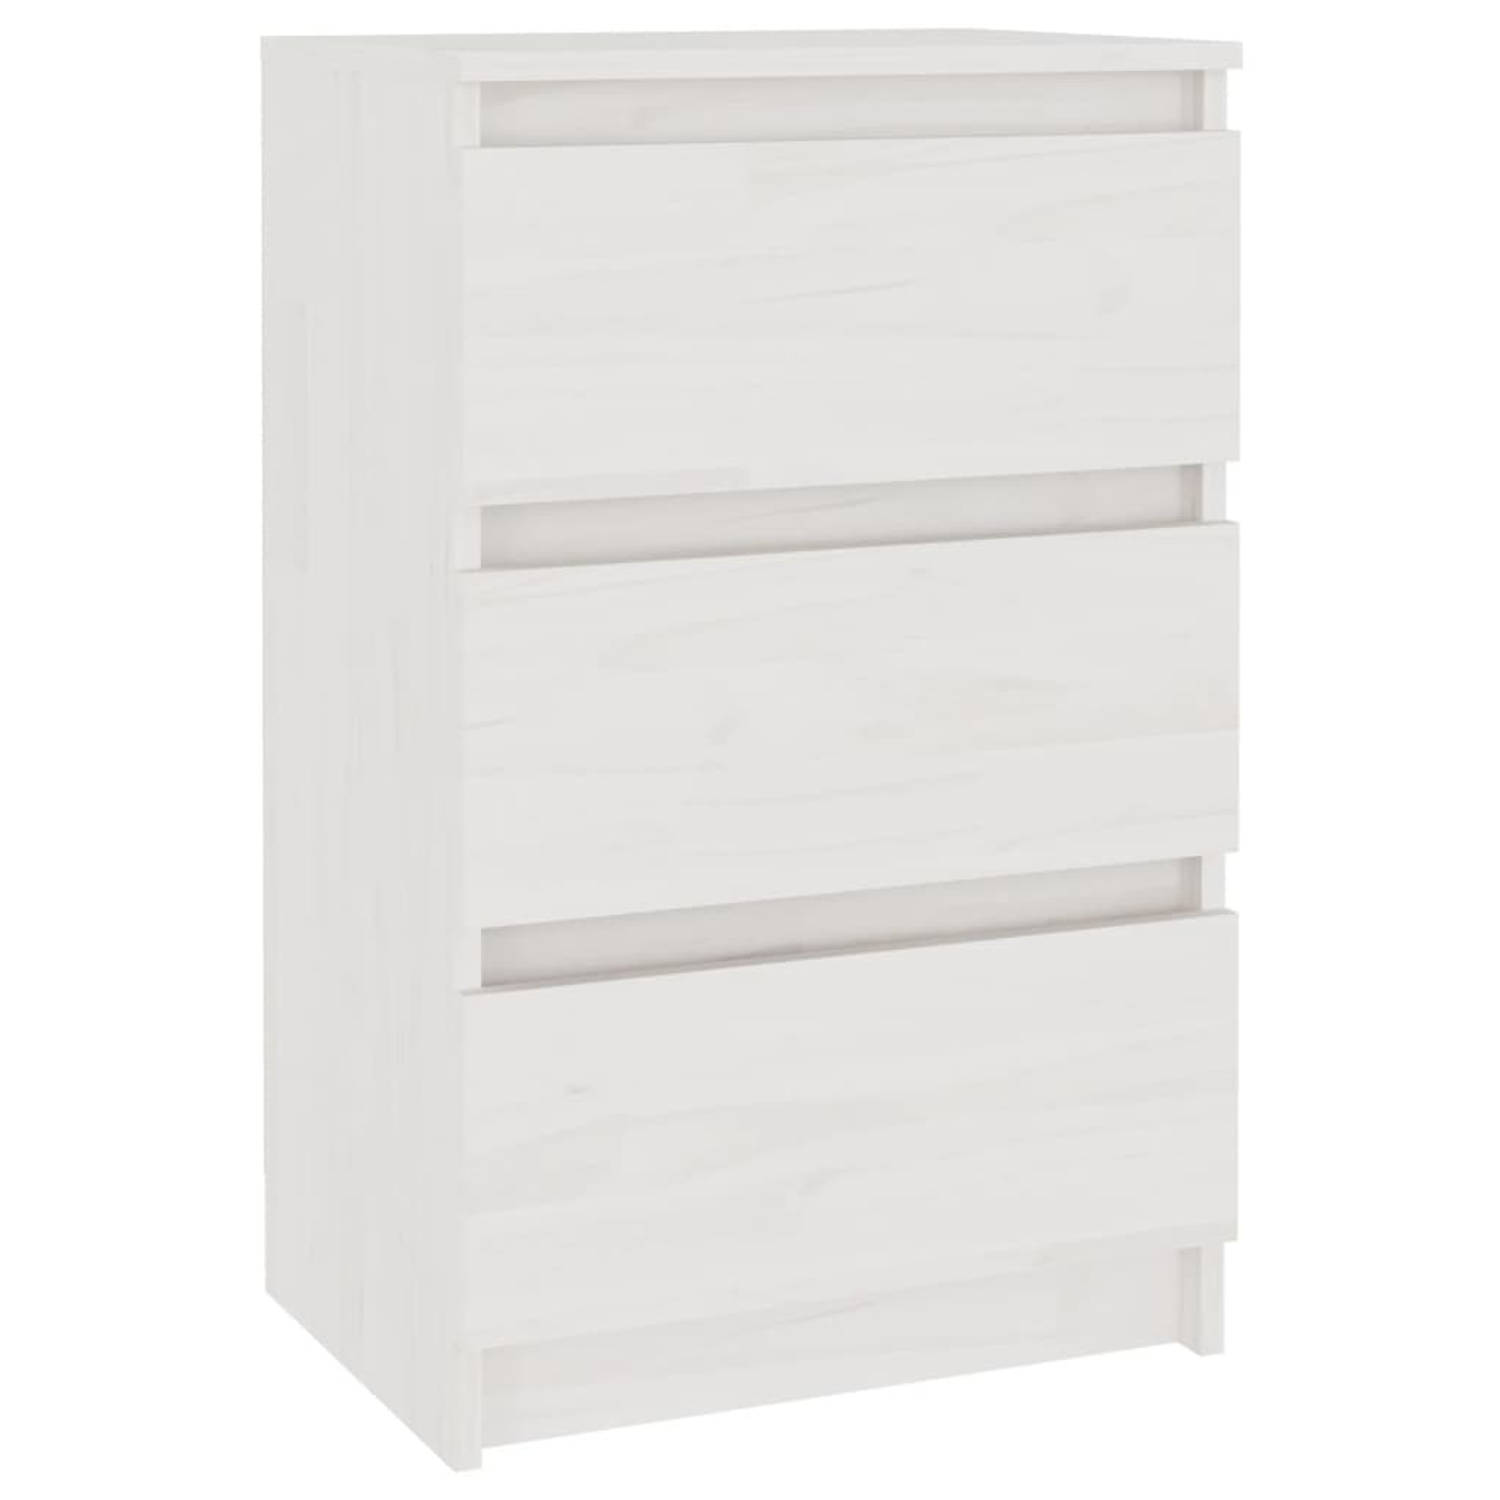 The Living Store Nachtkastje Wit 40x29.5x64 cm - Massief grenenhout - 3 lades